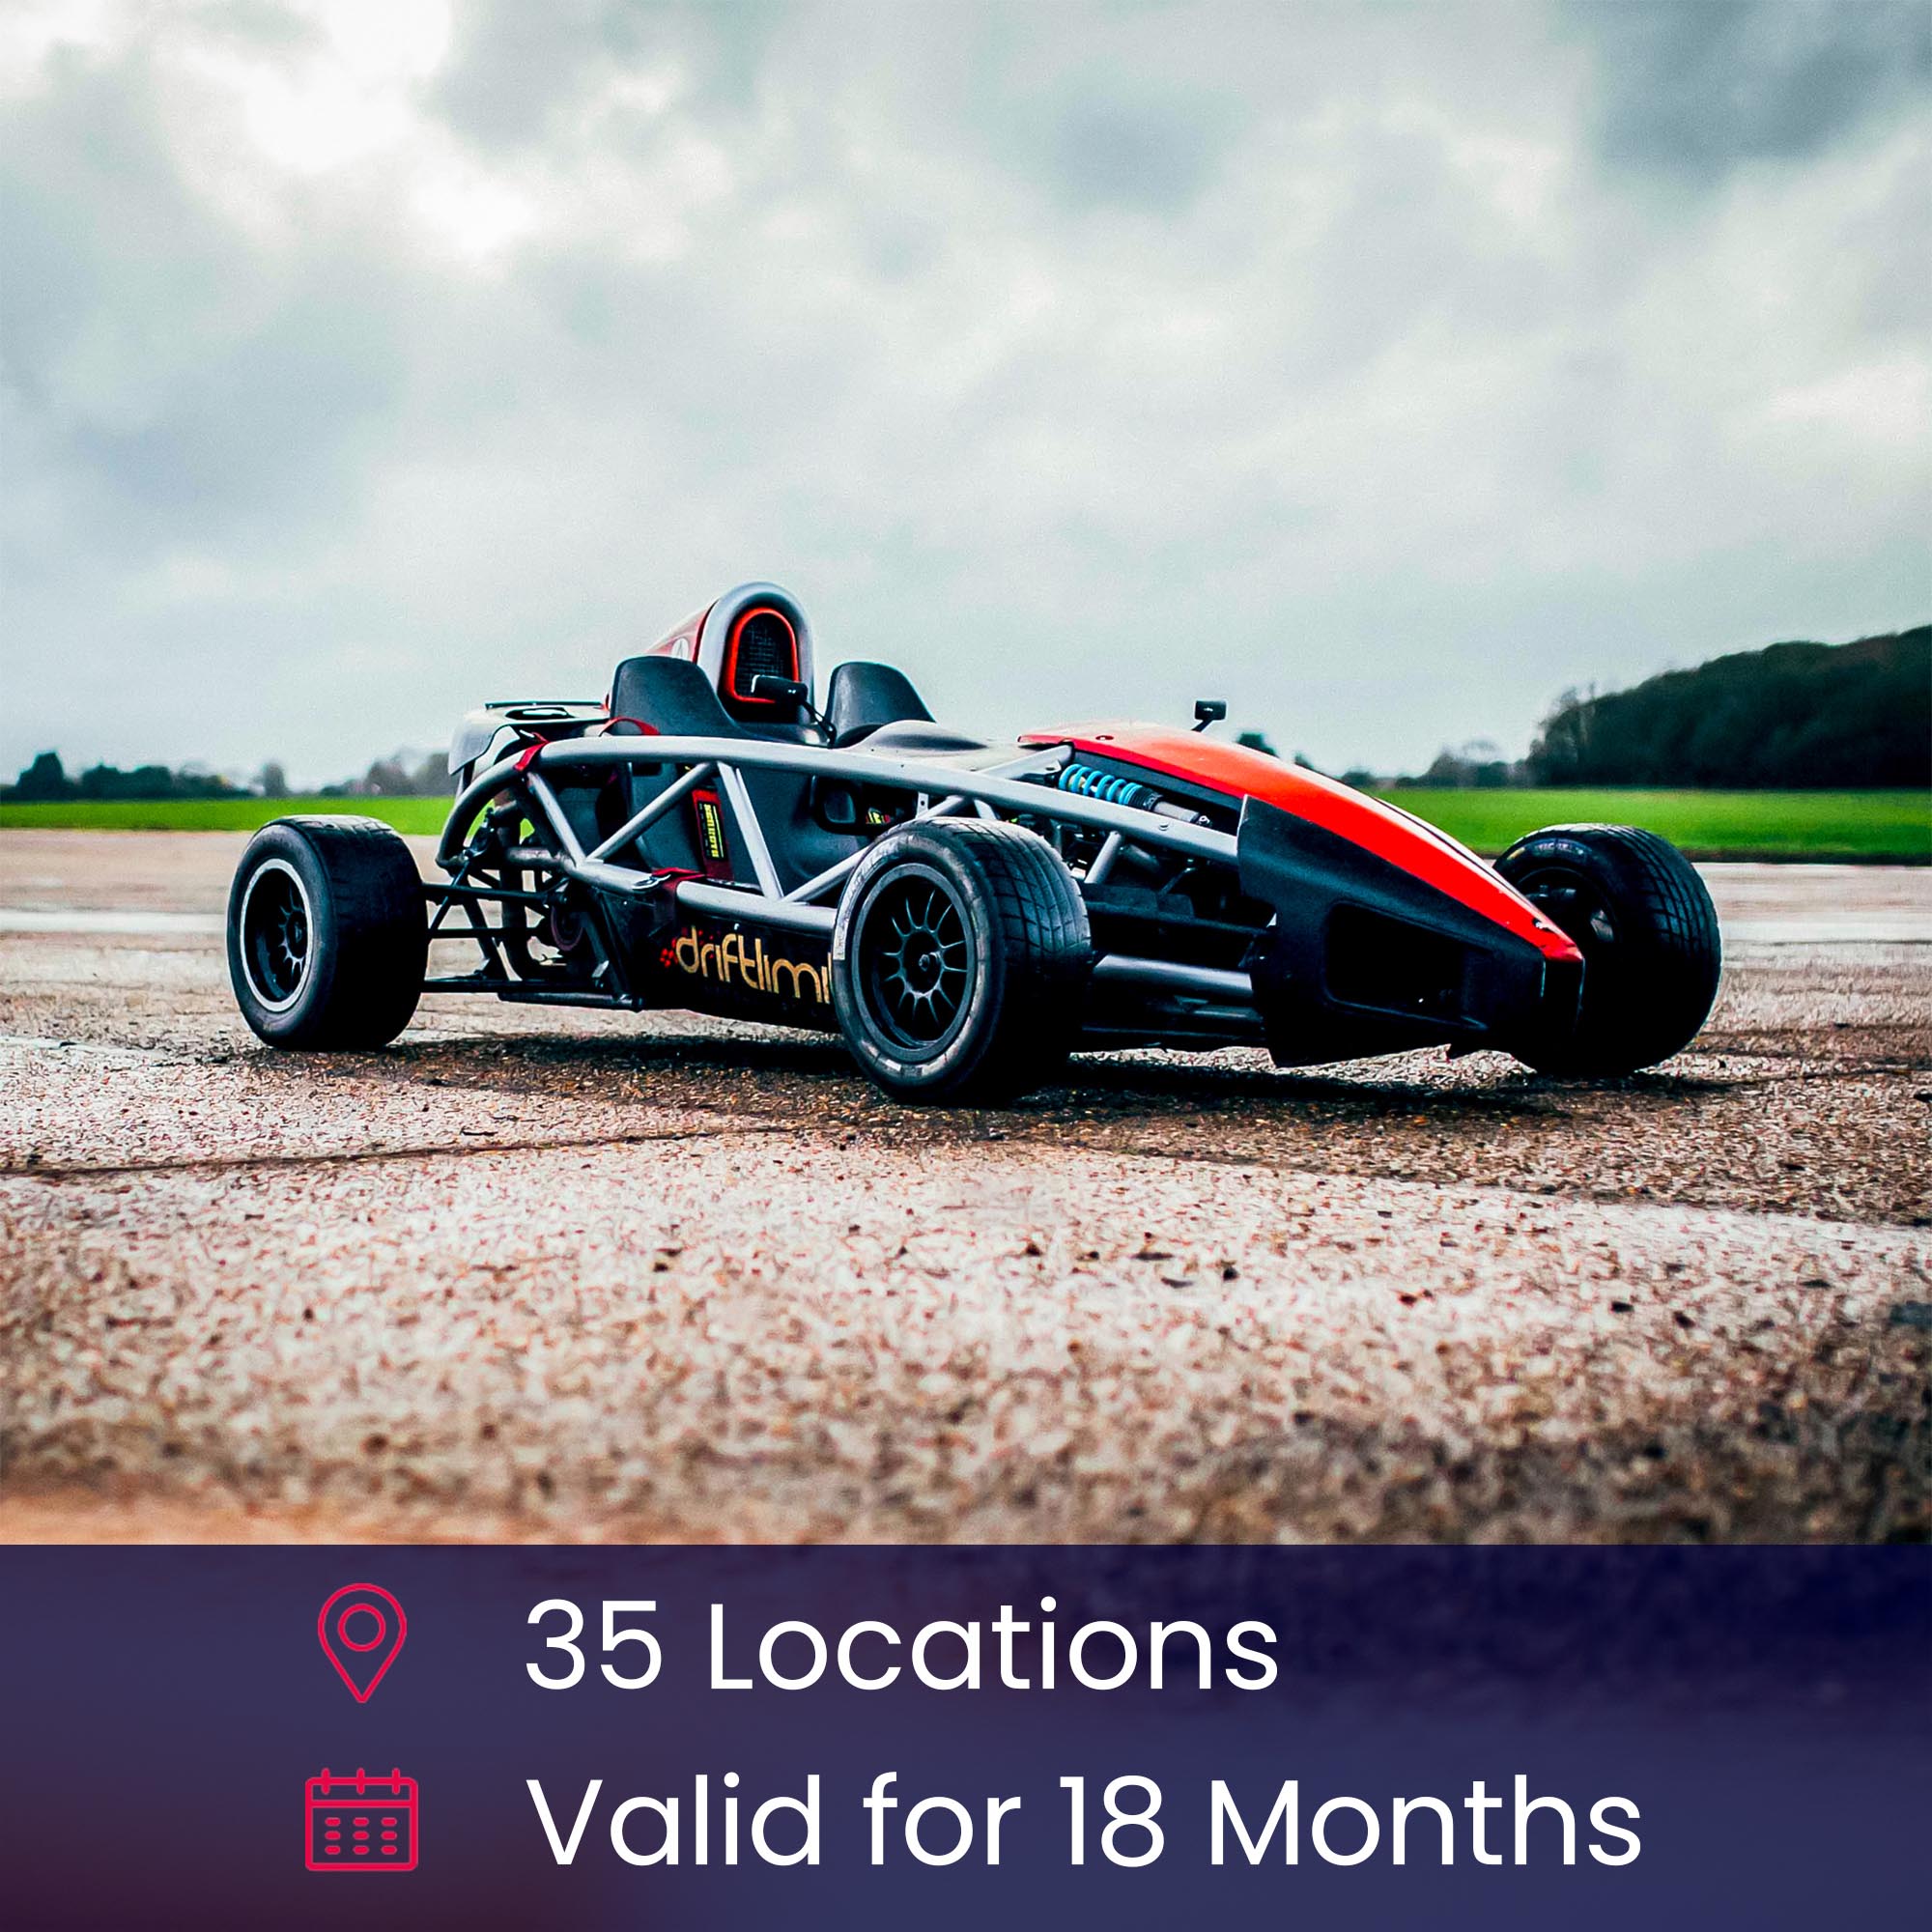 Ariel Atom Thrill with High Speed Passenger Ride Gift Experience Day